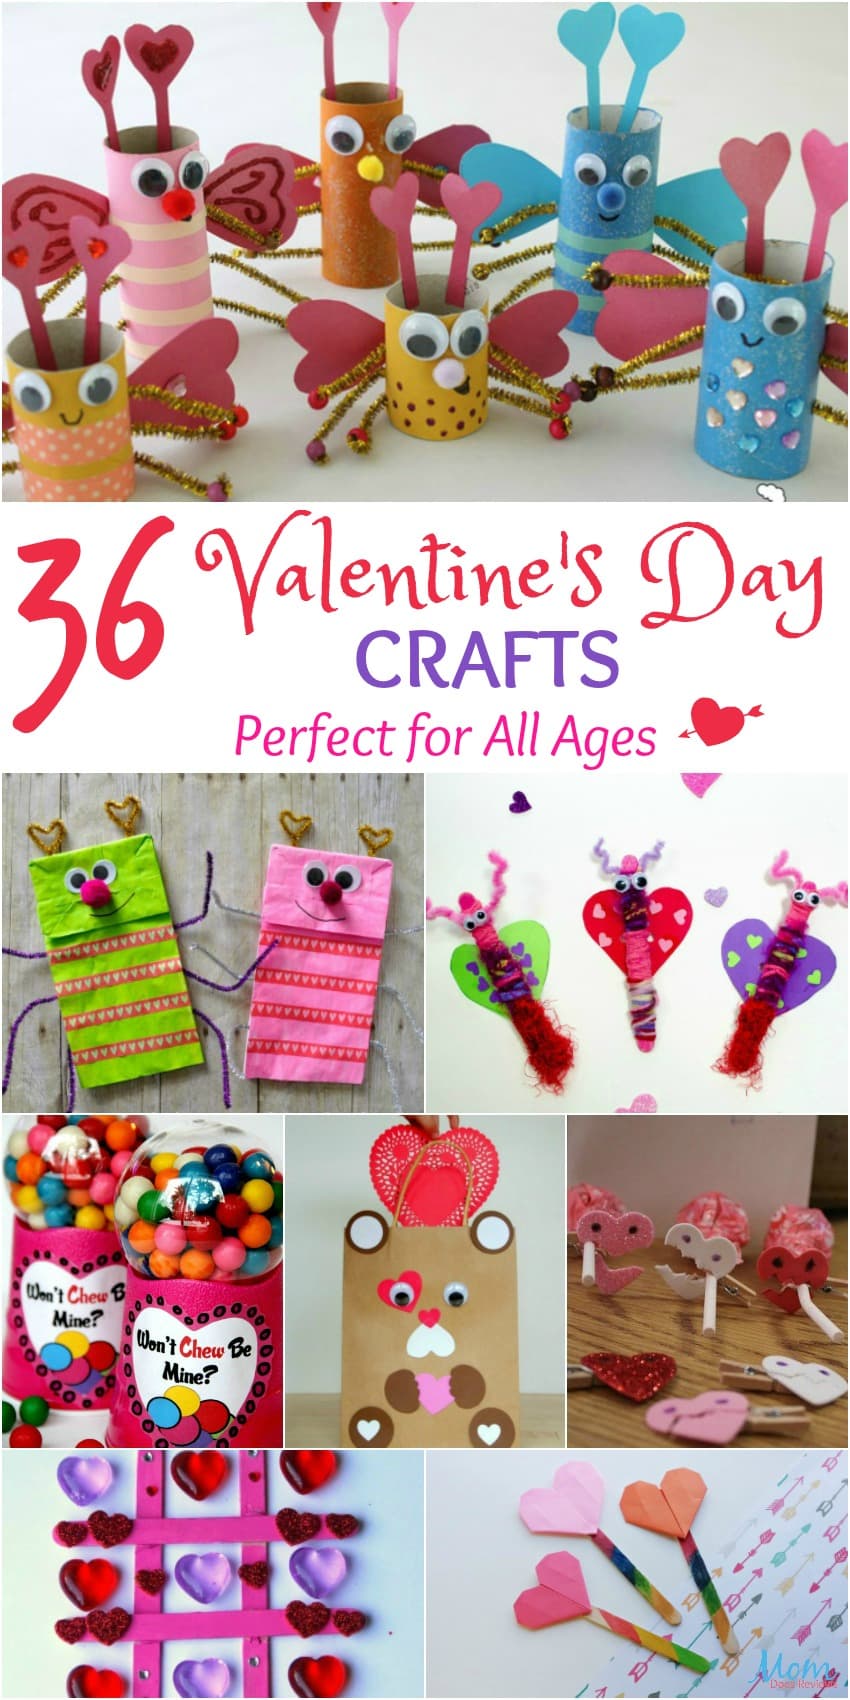 36 Valentine's Day Crafts Perfect for All Ages #Sweet2019 #crafts #valentinesday #diy #funstuff